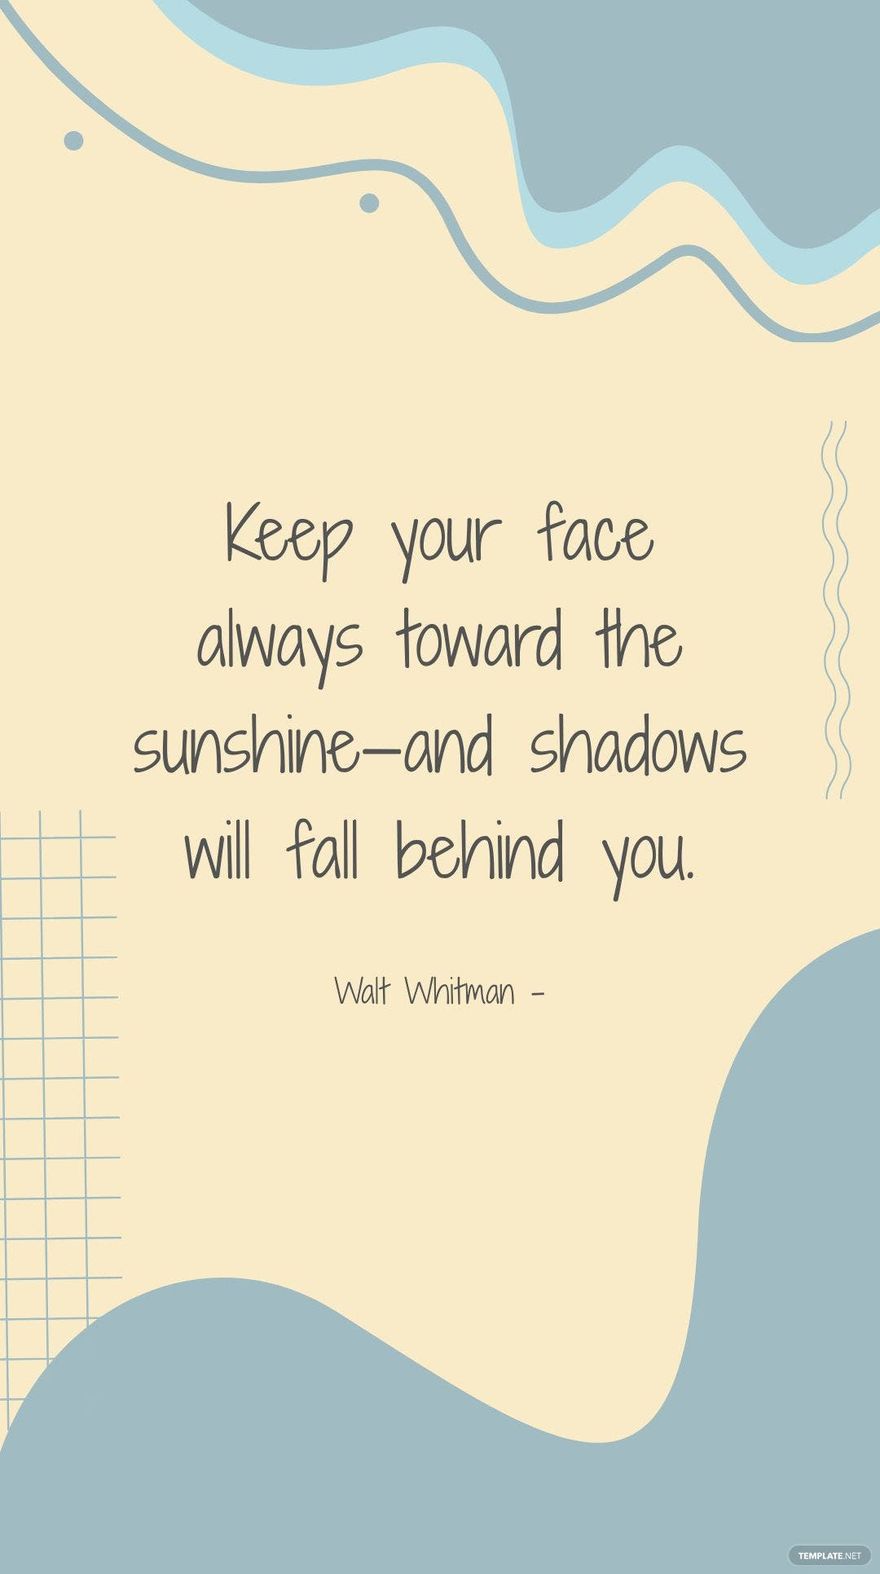 Walt Whitman - Keep your face always toward the sunshine—and shadows will fall behind you.